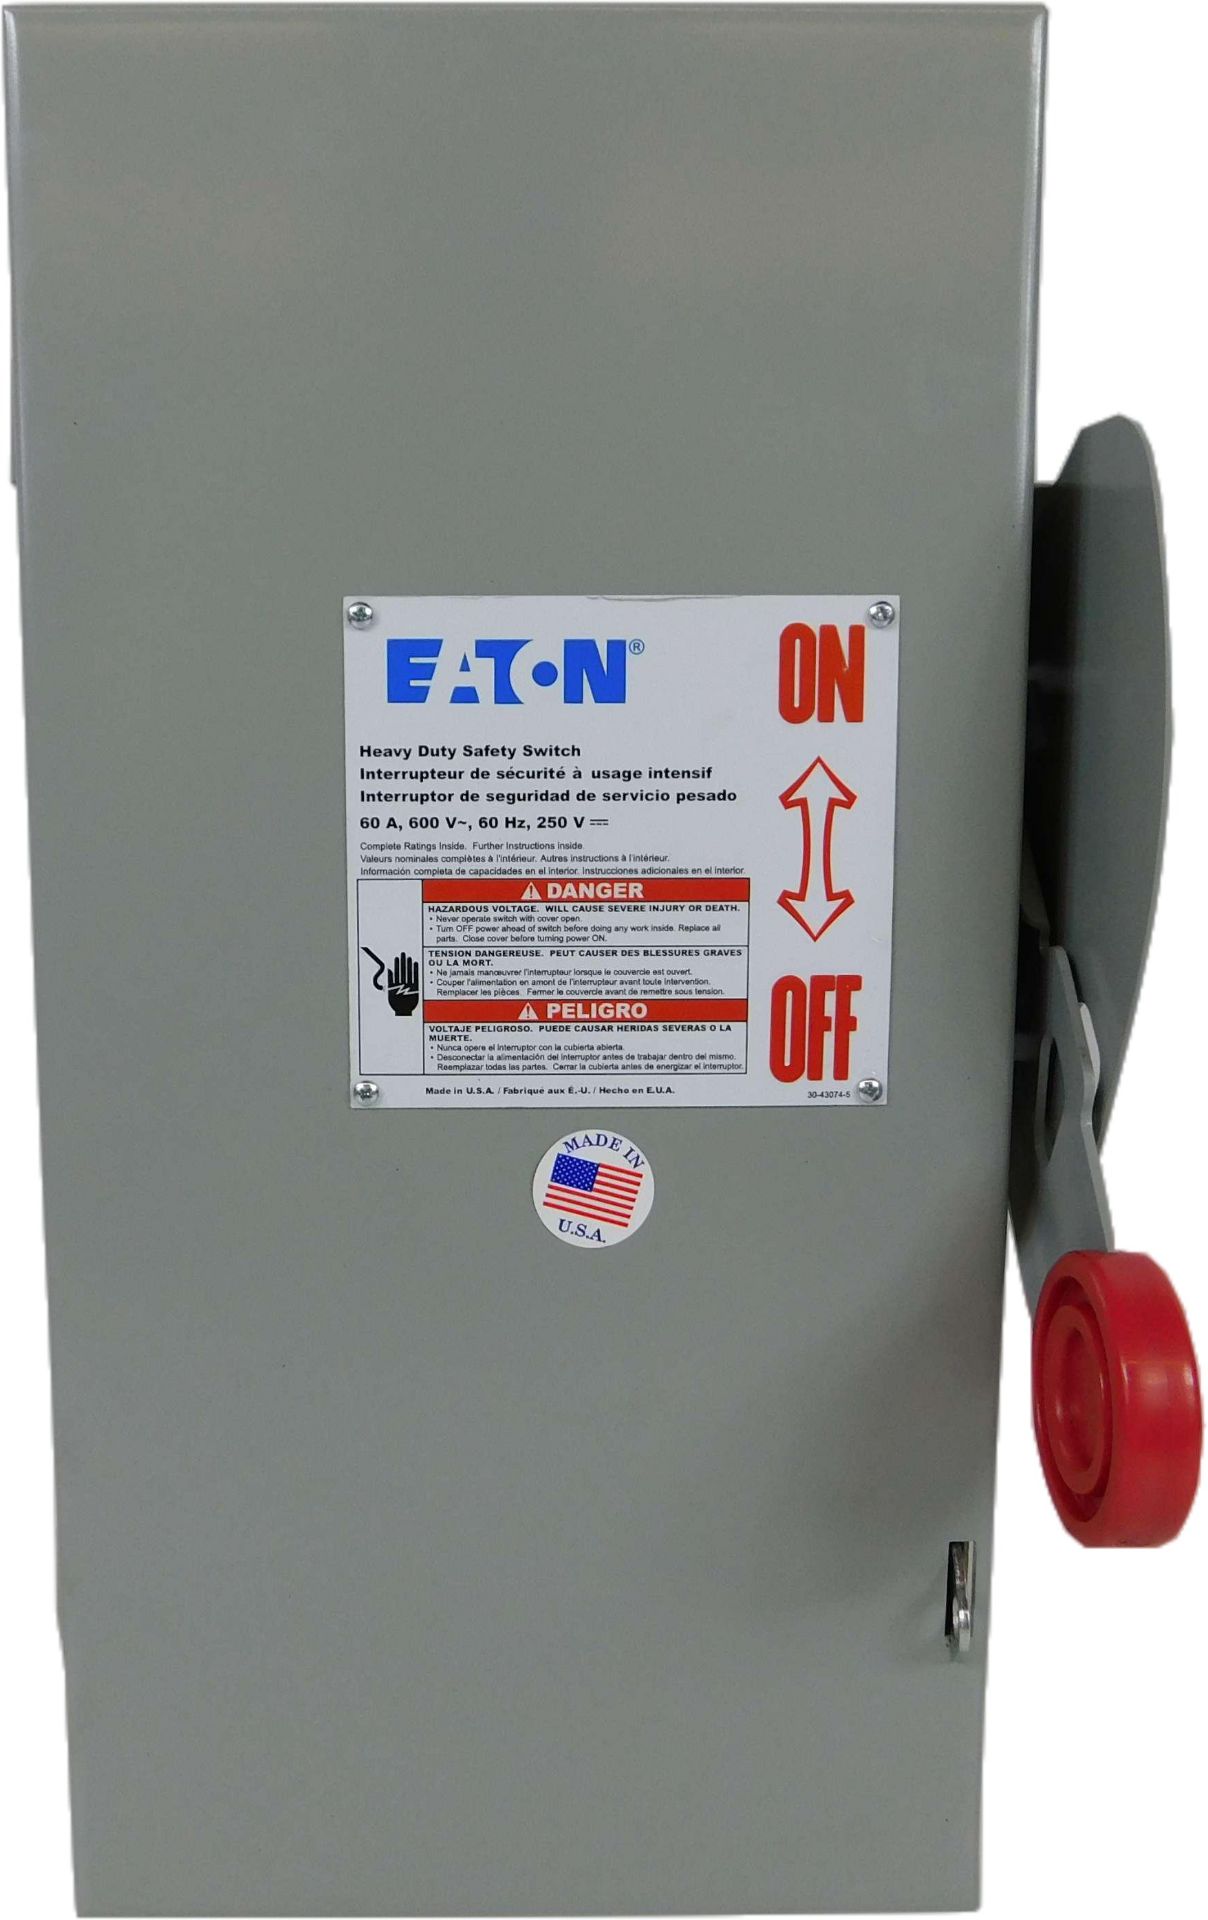 1x Eaton DH362UGK Heavy Duty Safety Switches EA